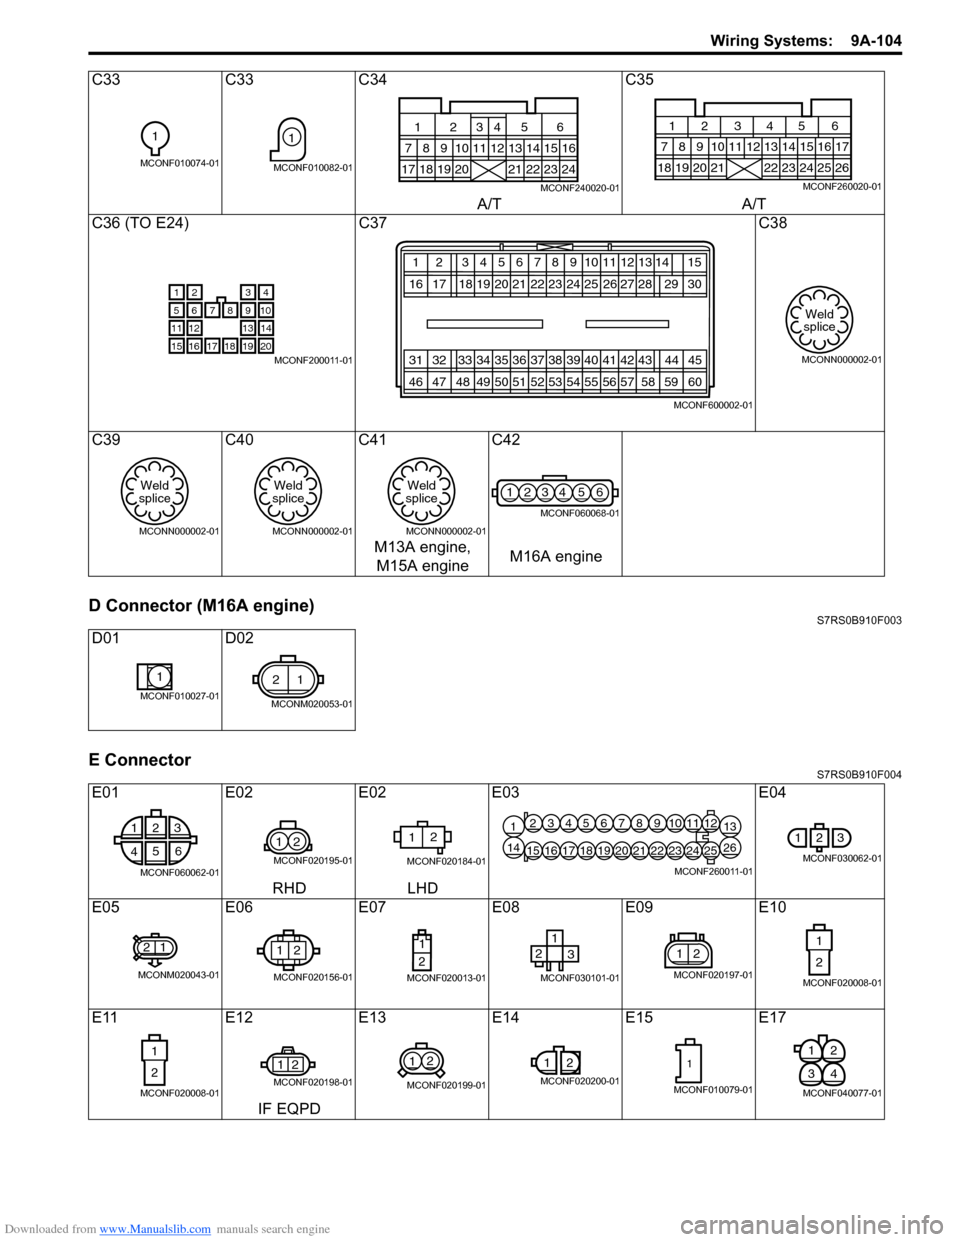 SUZUKI SWIFT 2007 2.G Service Workshop Manual Downloaded from www.Manualslib.com manuals search engine Wiring Systems:  9A-104
D Connector (M16A engine)S7RS0B910F003
E ConnectorS7RS0B910F004
C33C33C34 C35
A/T A/T
C36 (TO E24) C37 C38
C39 C40C41 C